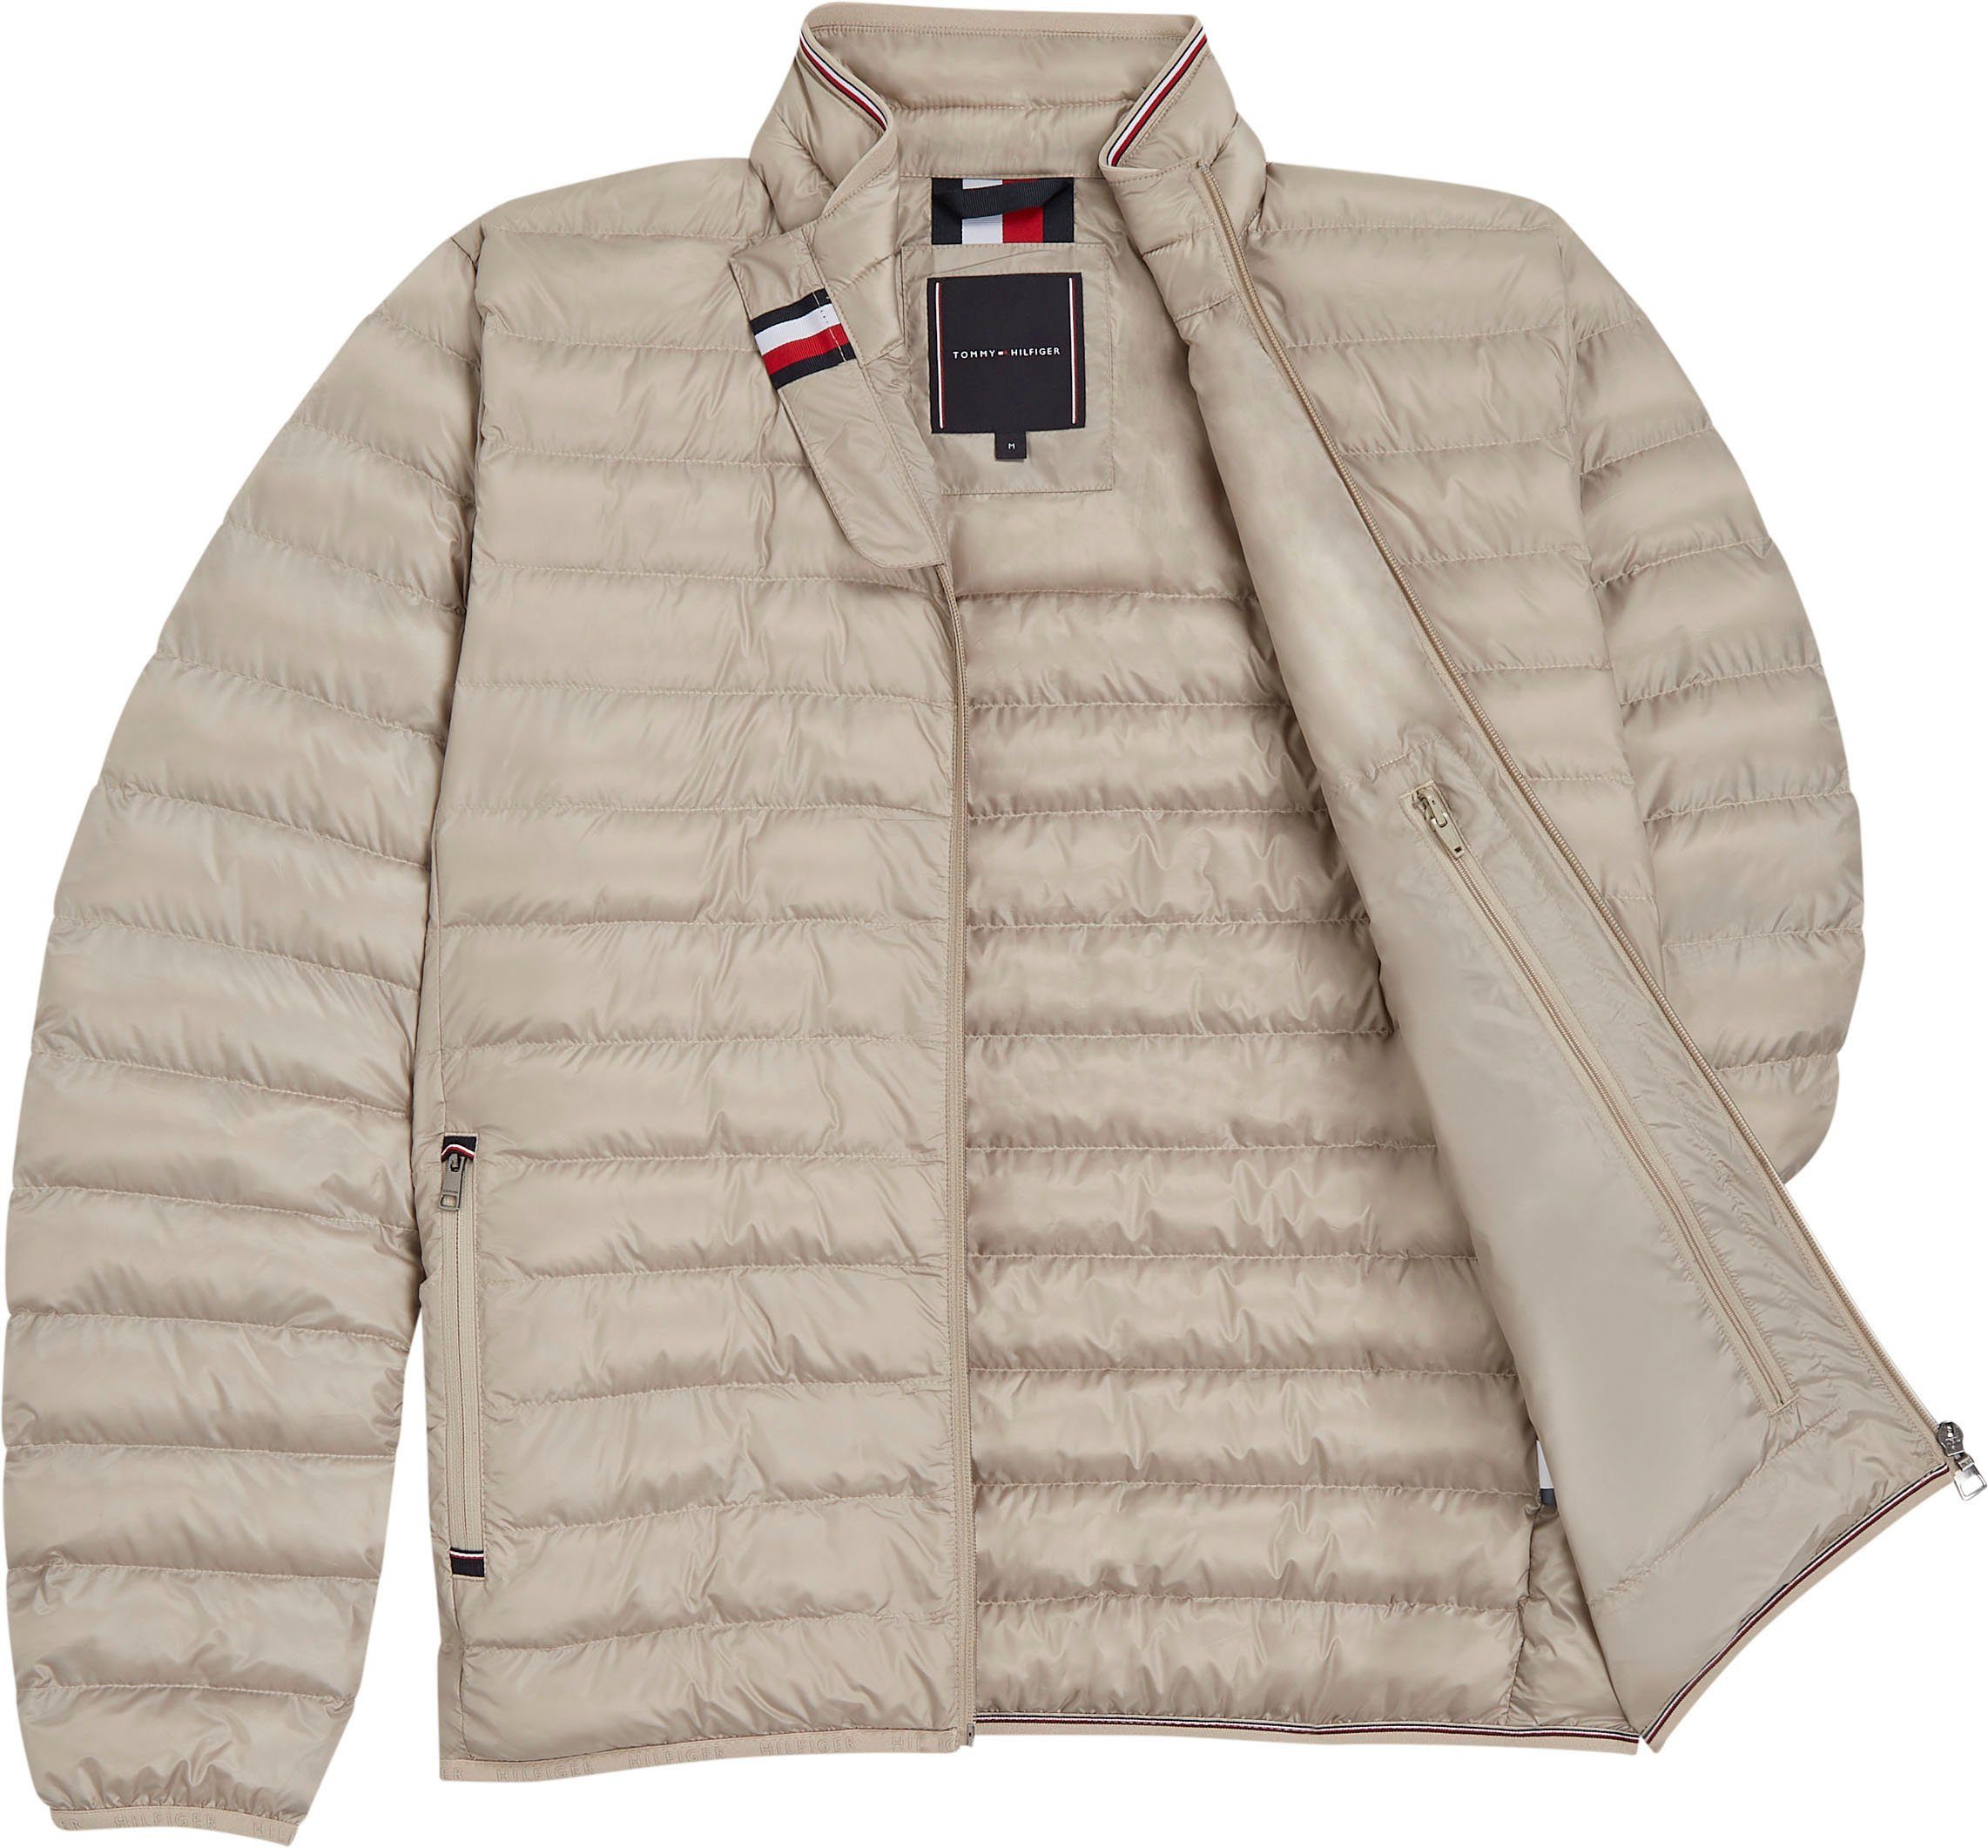 JACKET RECYCLED Hilfiger PACKABLE Tommy Tommy Hilfiger Stone Steppjacke Logostickerei mit